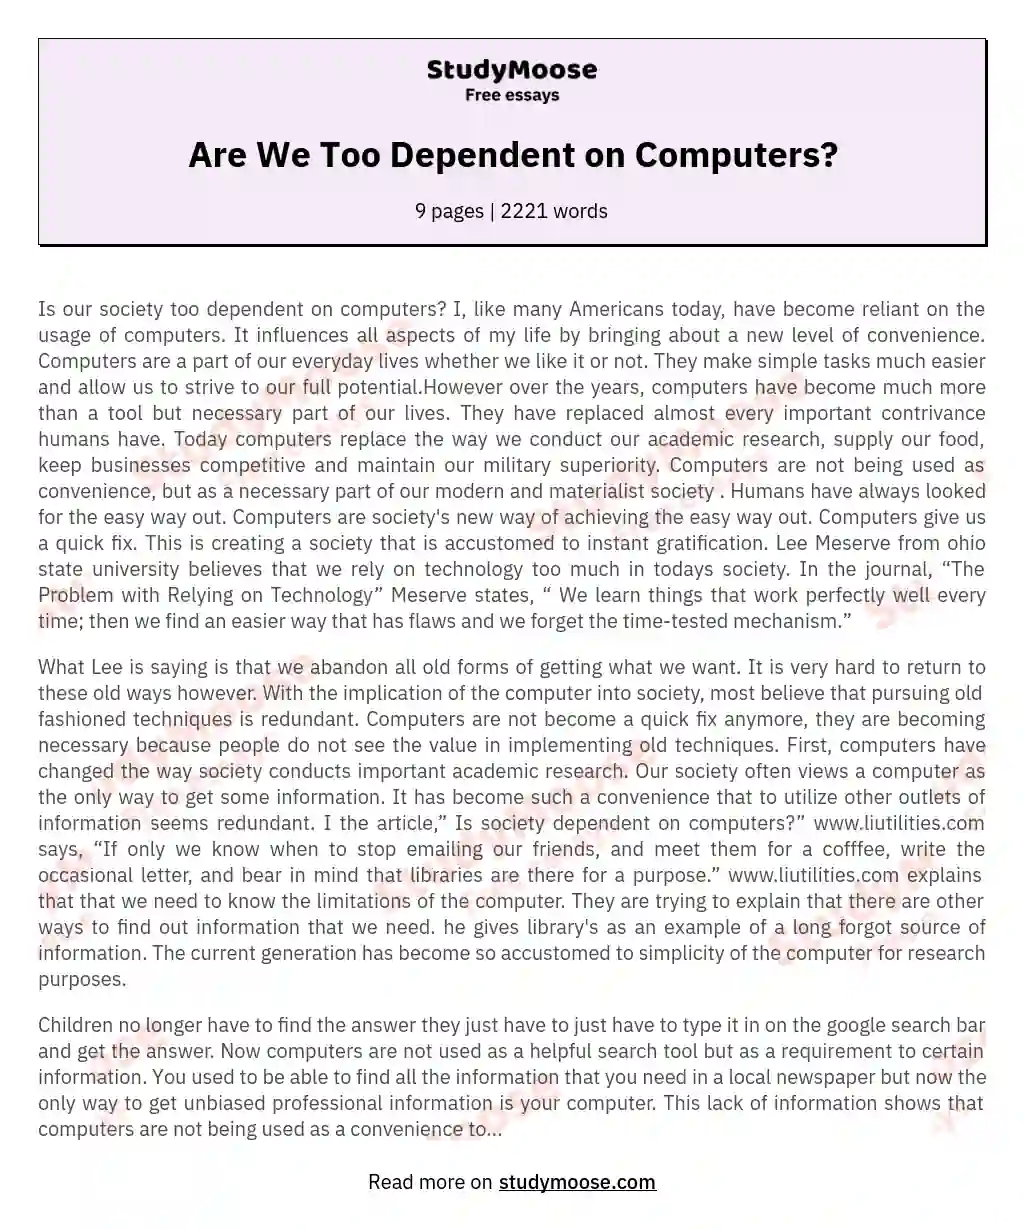 Are We Too Dependent on Computers? essay